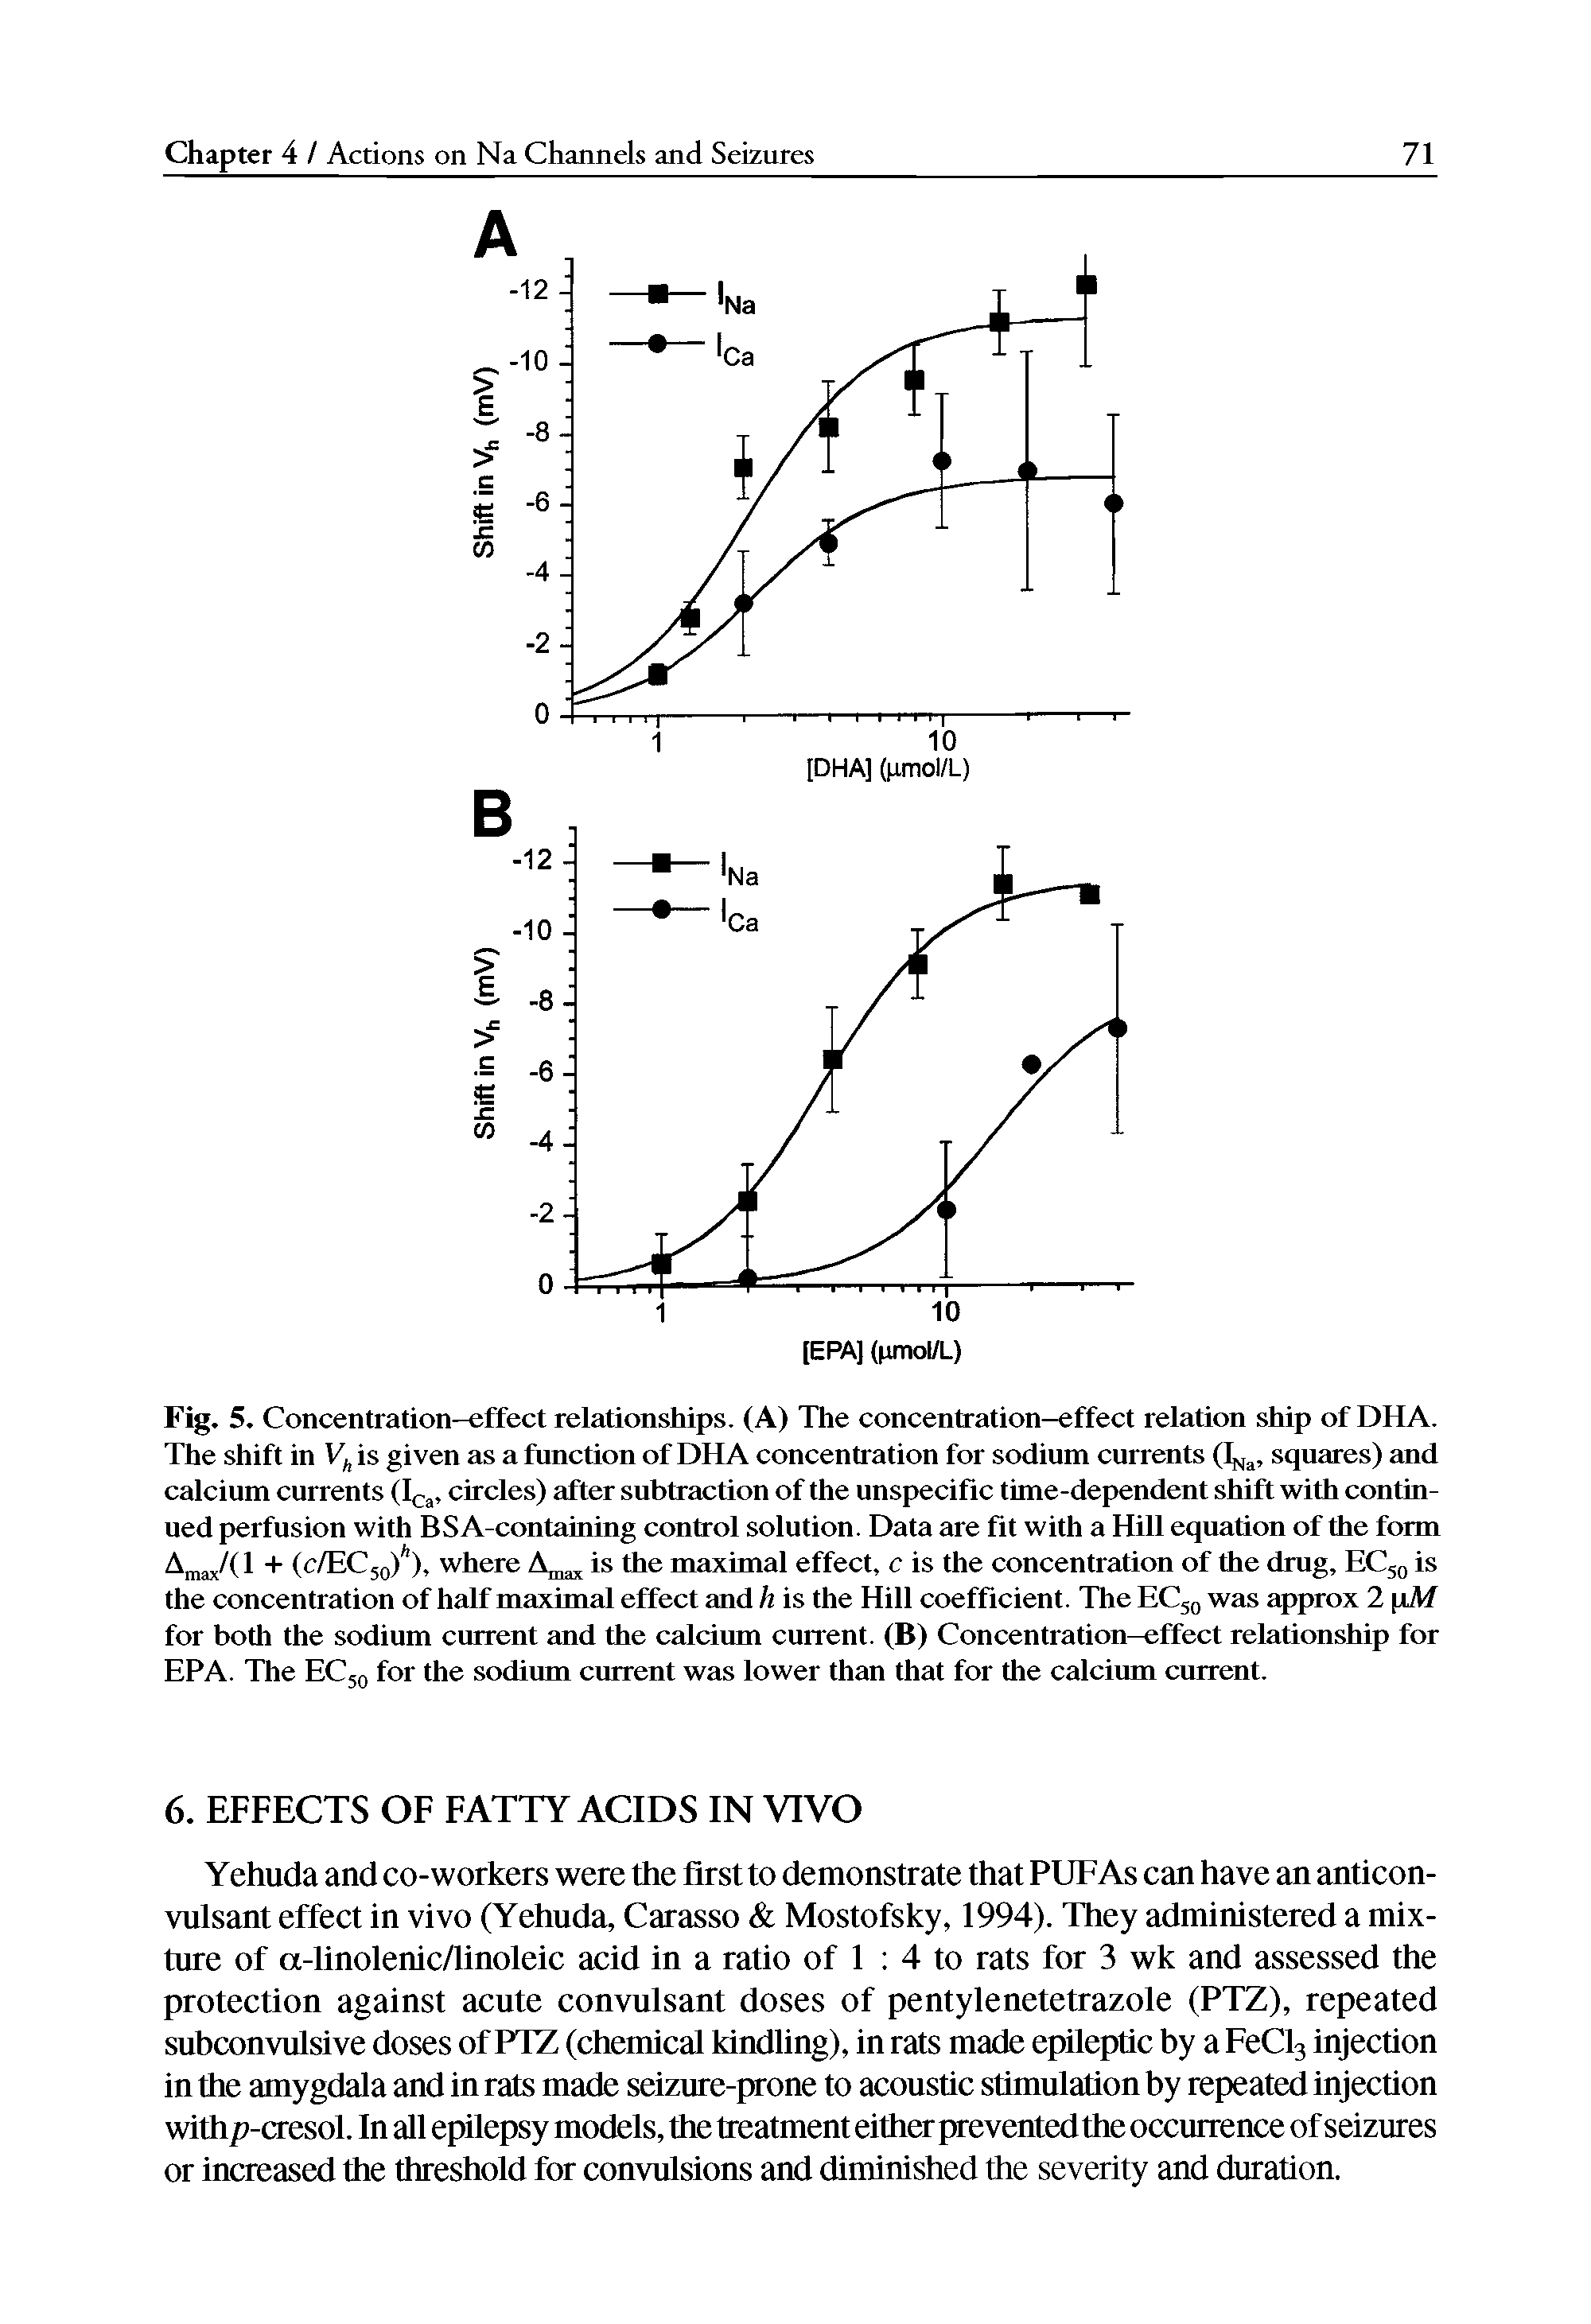 Fig. 5. Concentration-effect relationships. (A) The concentration-effect relation ship of DHA. The shift in I4 is given as a function of DHA concentration for sodium currents squares) and...